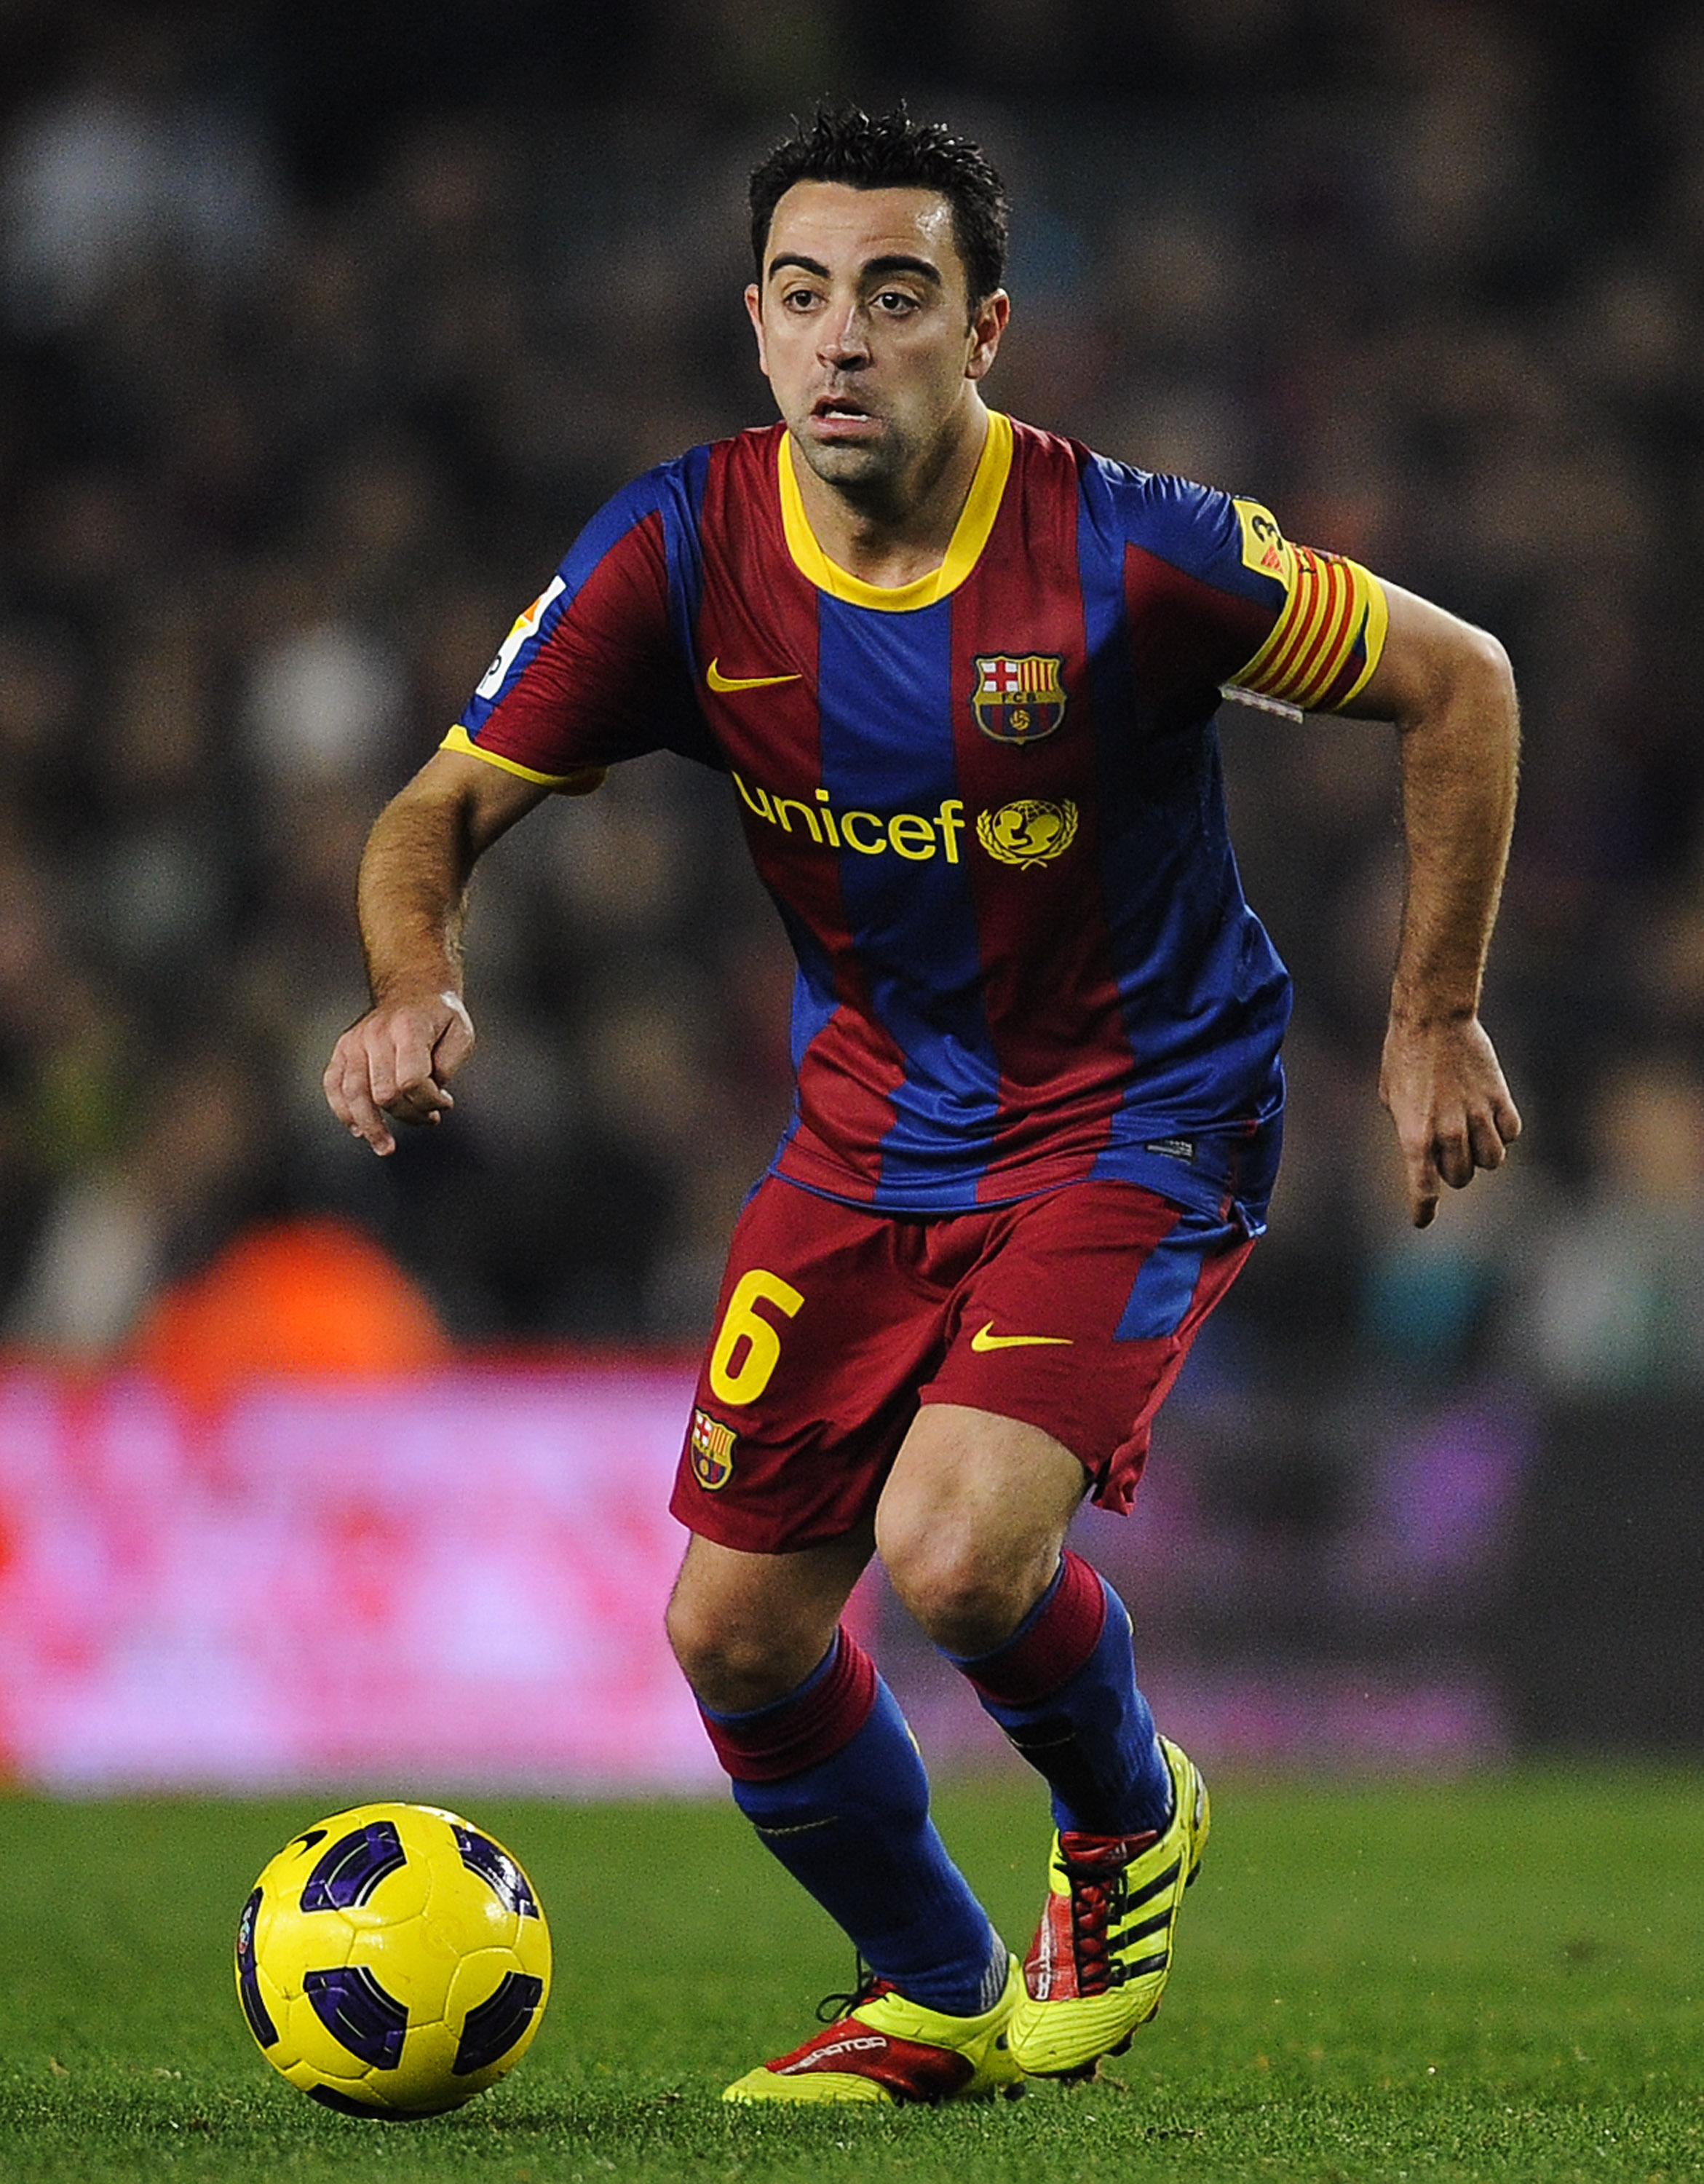 BARCELONA, SPAIN - JANUARY 02:  Xavi Hernandez of Barcelona runs with the ball during the La Liga match between Barcelona and Levante UD at Camp Nou on January 2, 2011 in Barcelona, Spain. Barcelona won 2-1.  (Photo by David Ramos/Getty Images)